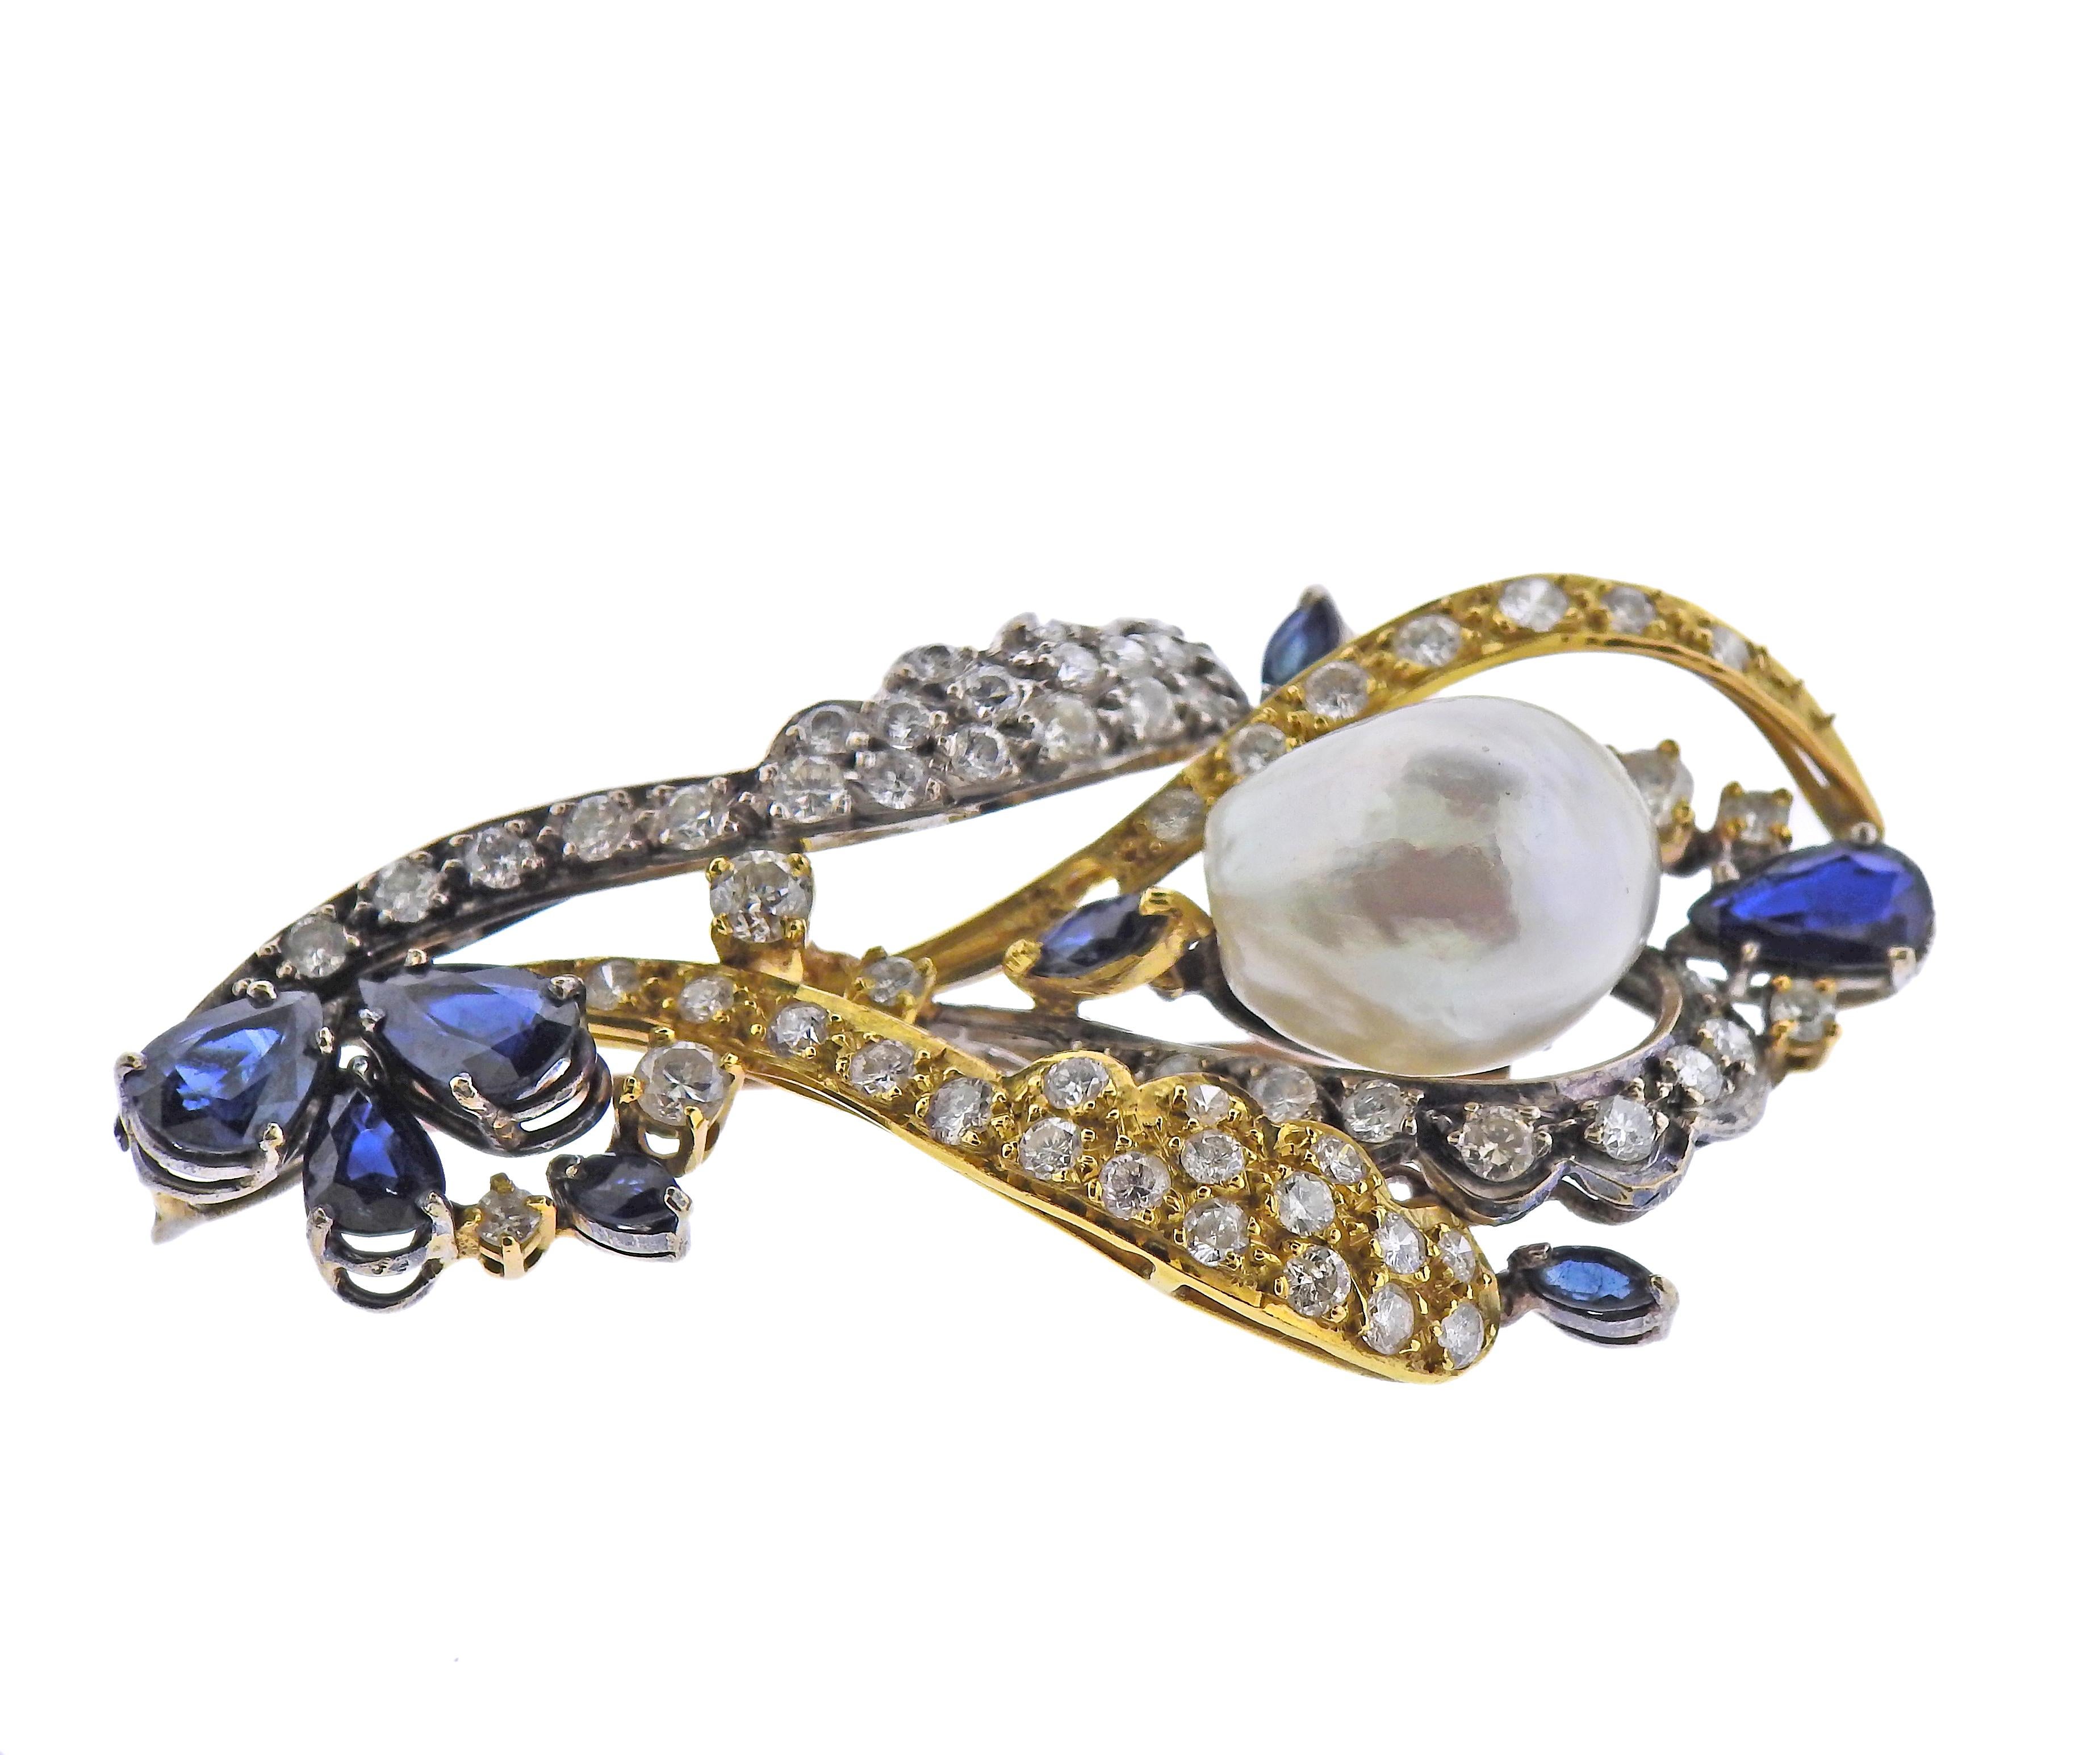 14k white and yellow gold brooch/pendant, featuring one 14.9 x 12.2mm Baroque pearl, surrounded with blue sapphires and approx. 2.20ctw in diamonds. Brooch is 56mm x 33mm. Weight - 15.9 grams.